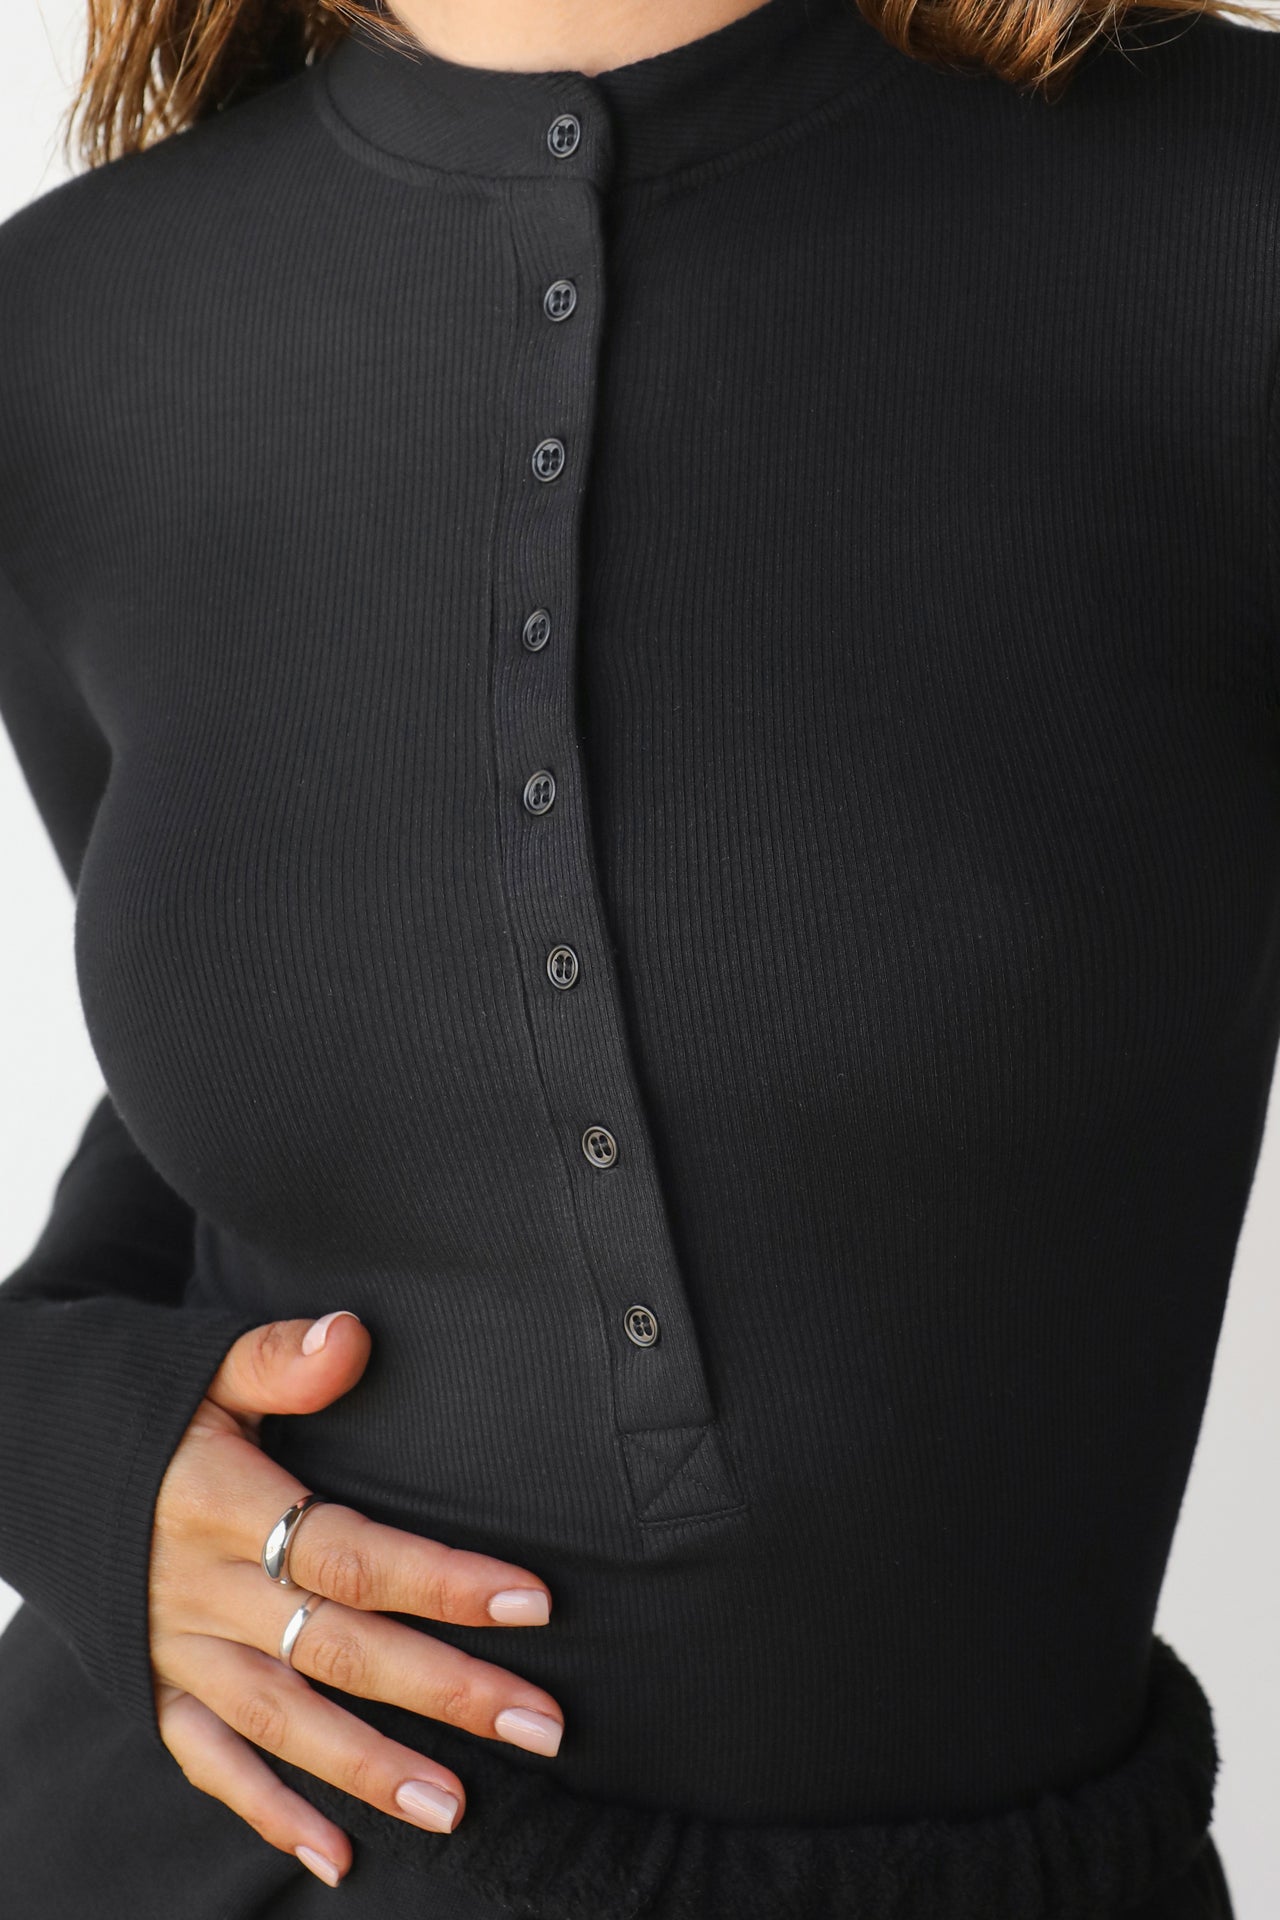 Close up detail front view of model posing in the fitted and stretchy black rib Button Down Henley long sleeve top with a high crew neckline and front buttons that reach about halfway down the shirt